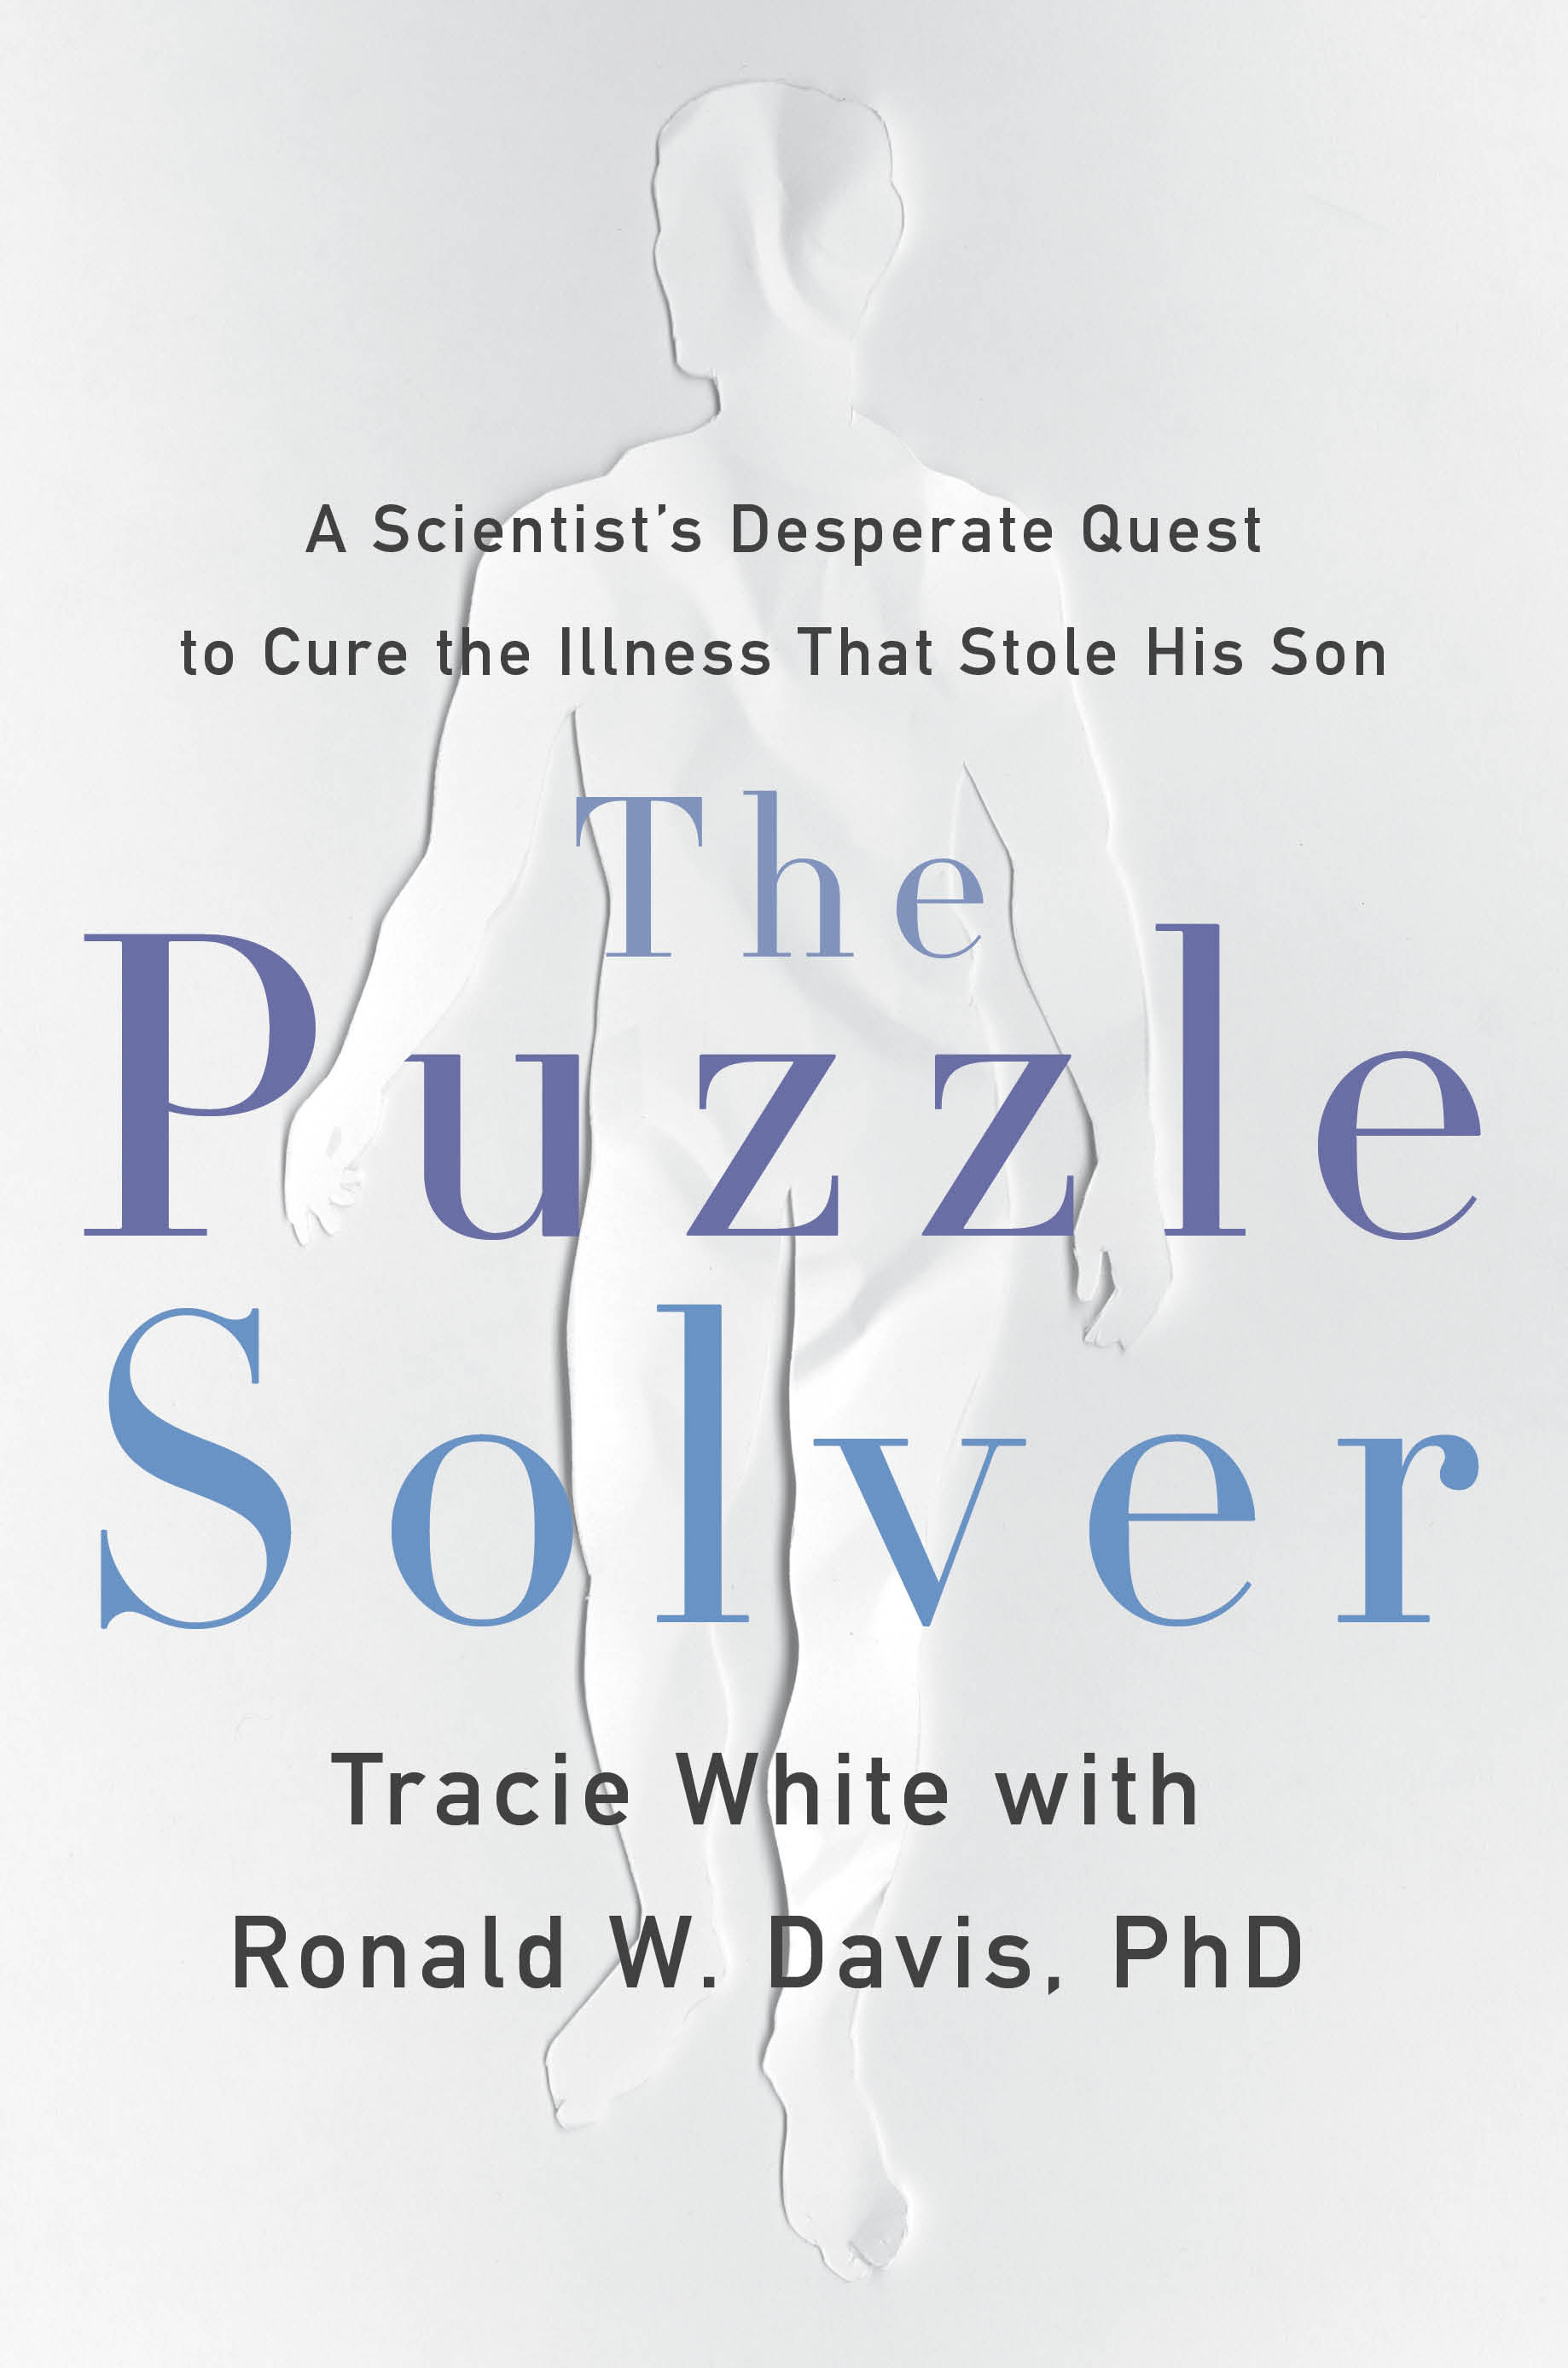 A book cover with an illustration of a person. Text: The Puzzle Solver